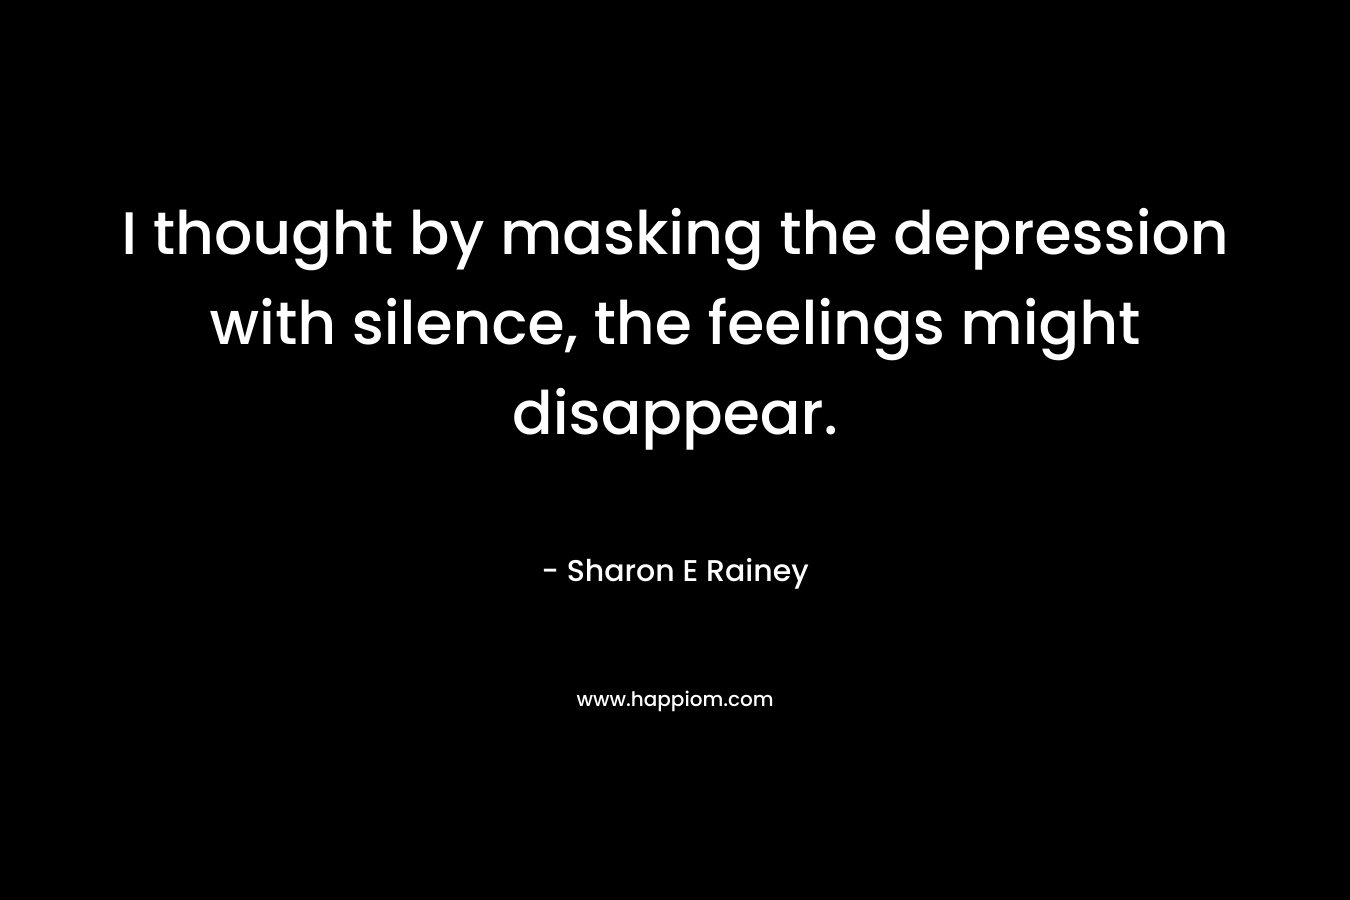 I thought by masking the depression with silence, the feelings might disappear. – Sharon E Rainey